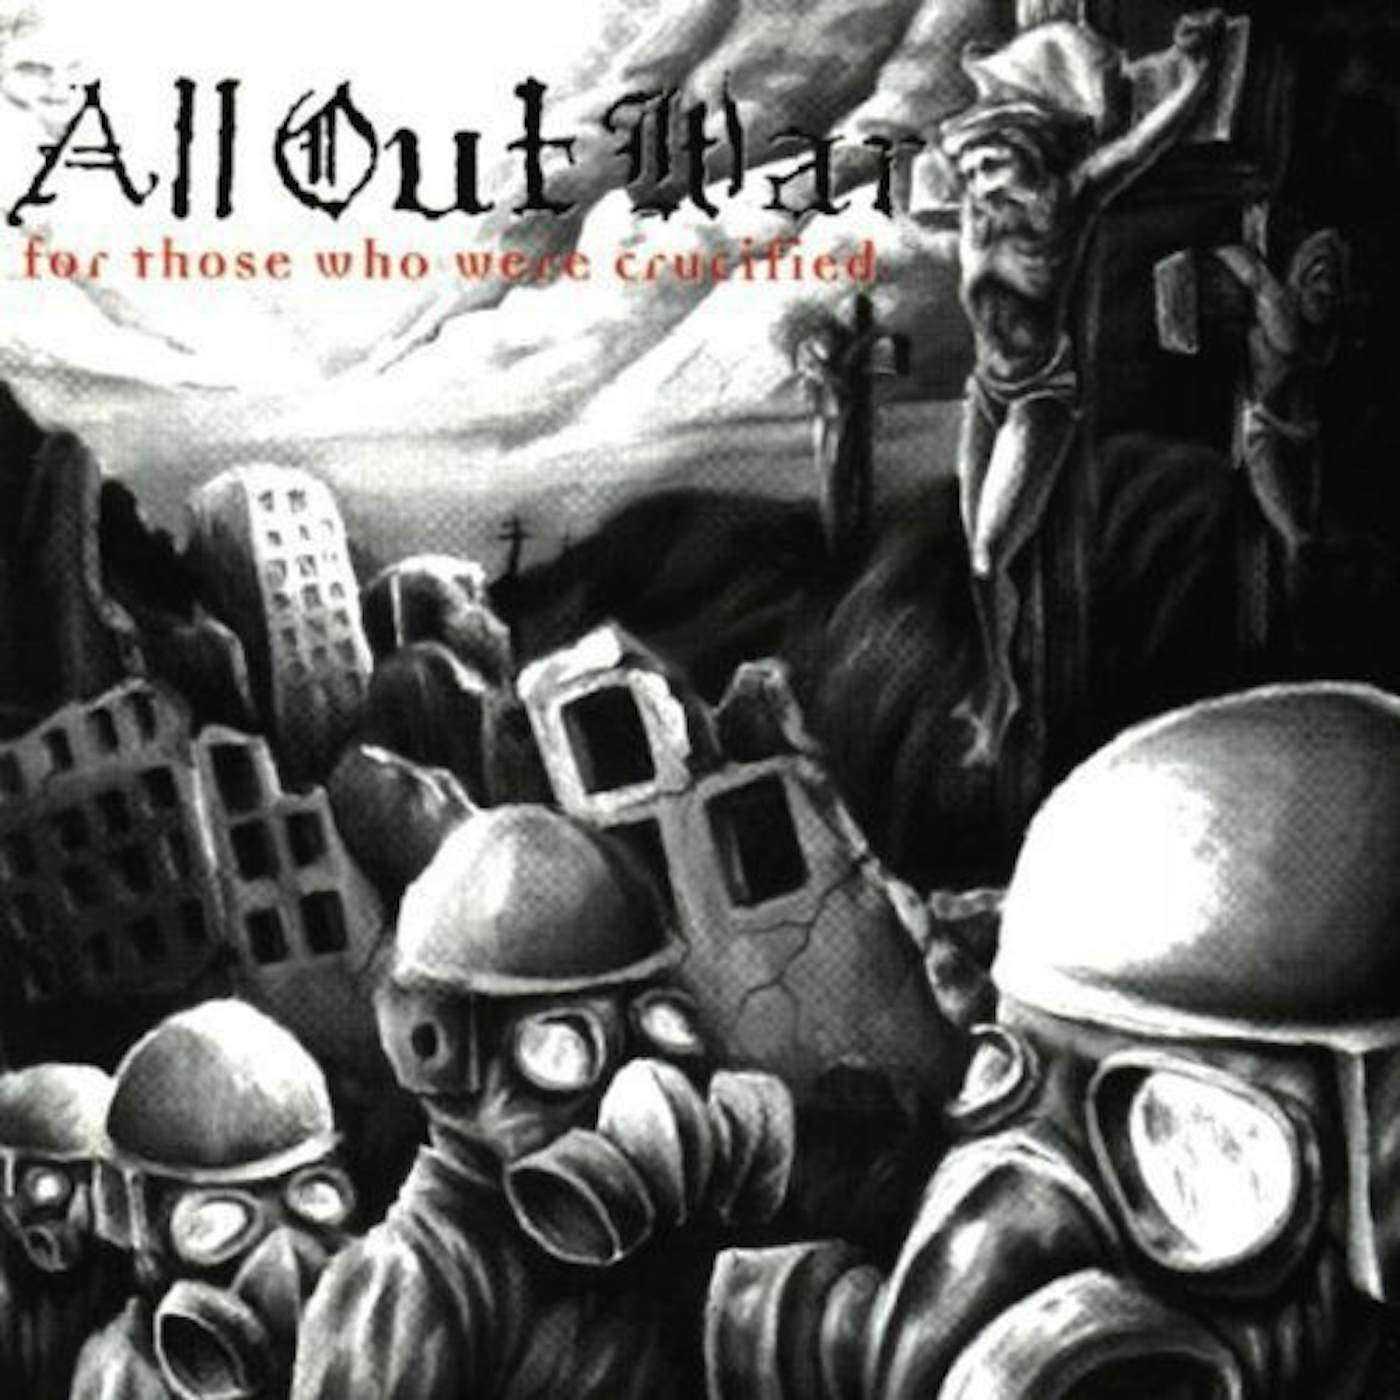 All Out War For Those Who Were Crucified Vinyl Record